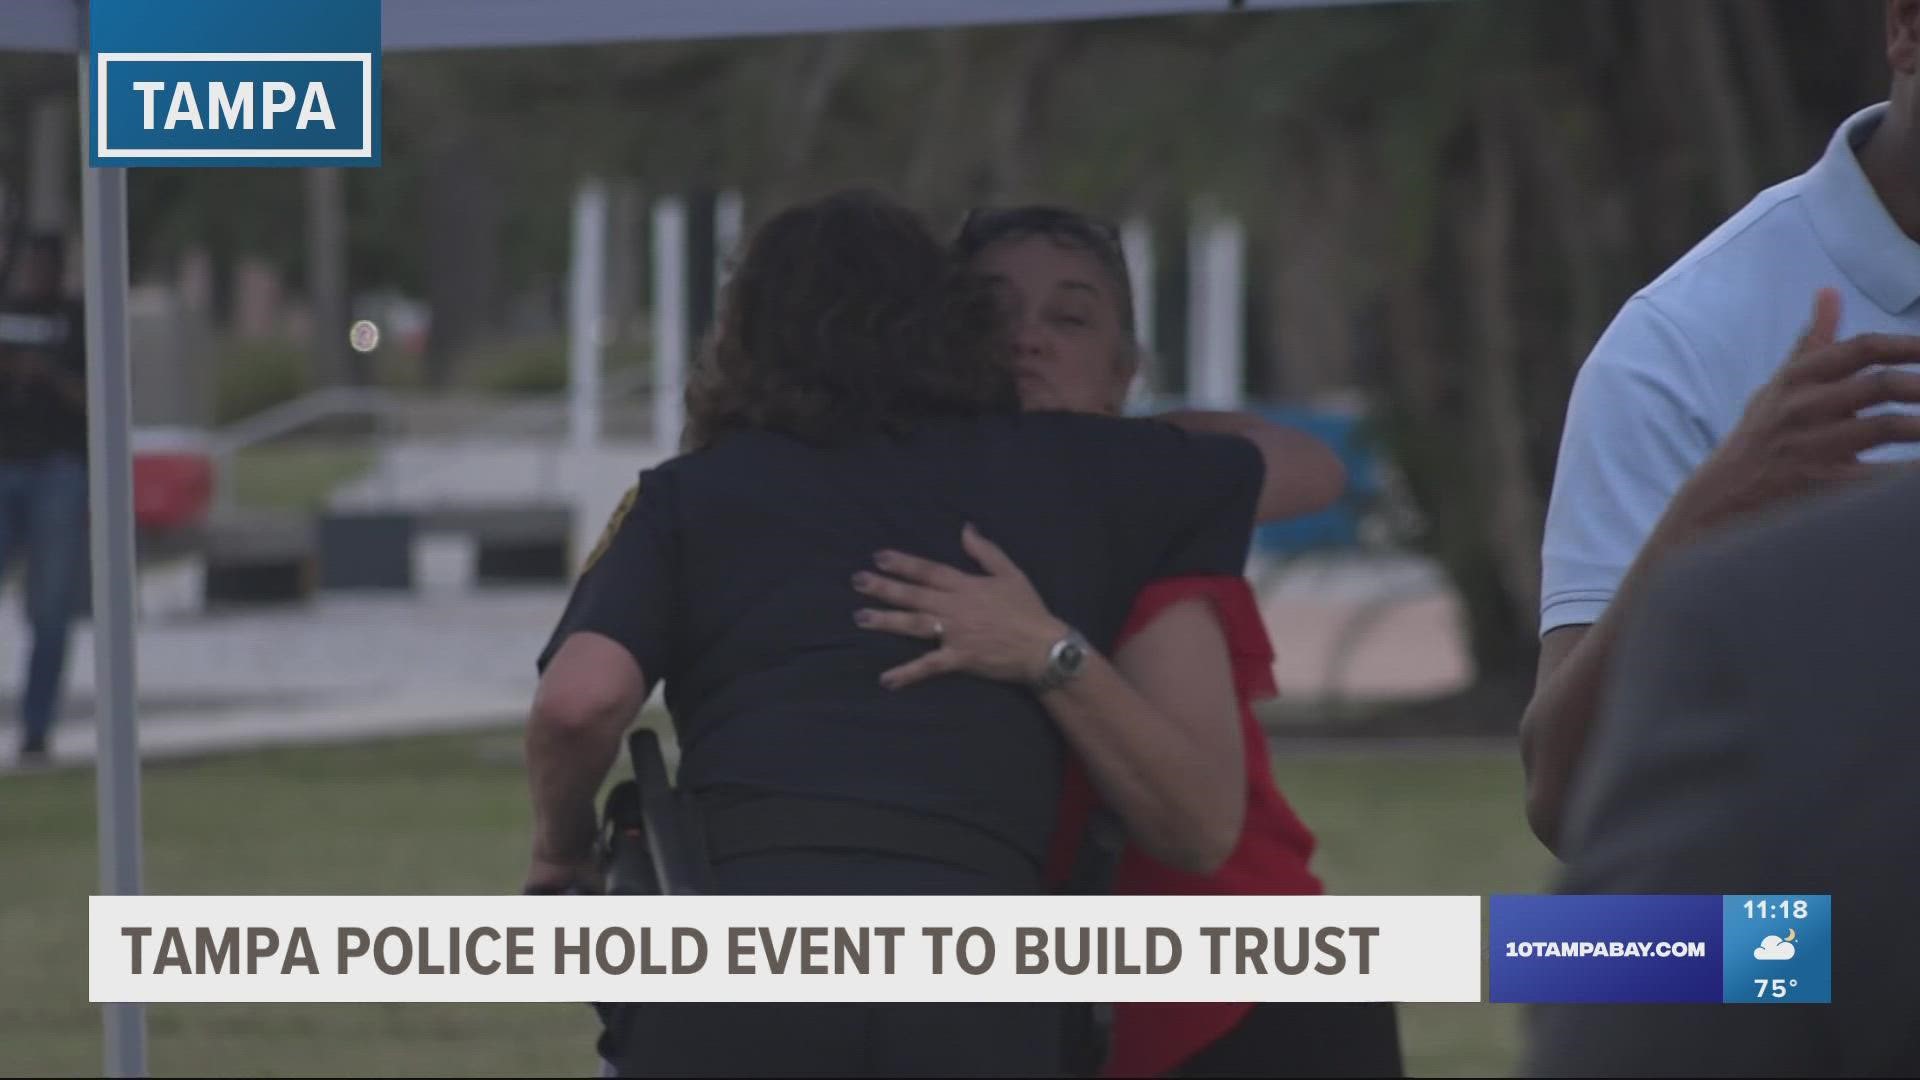 Tampa Police Department held an event with the community to strengthen relationships between the two.